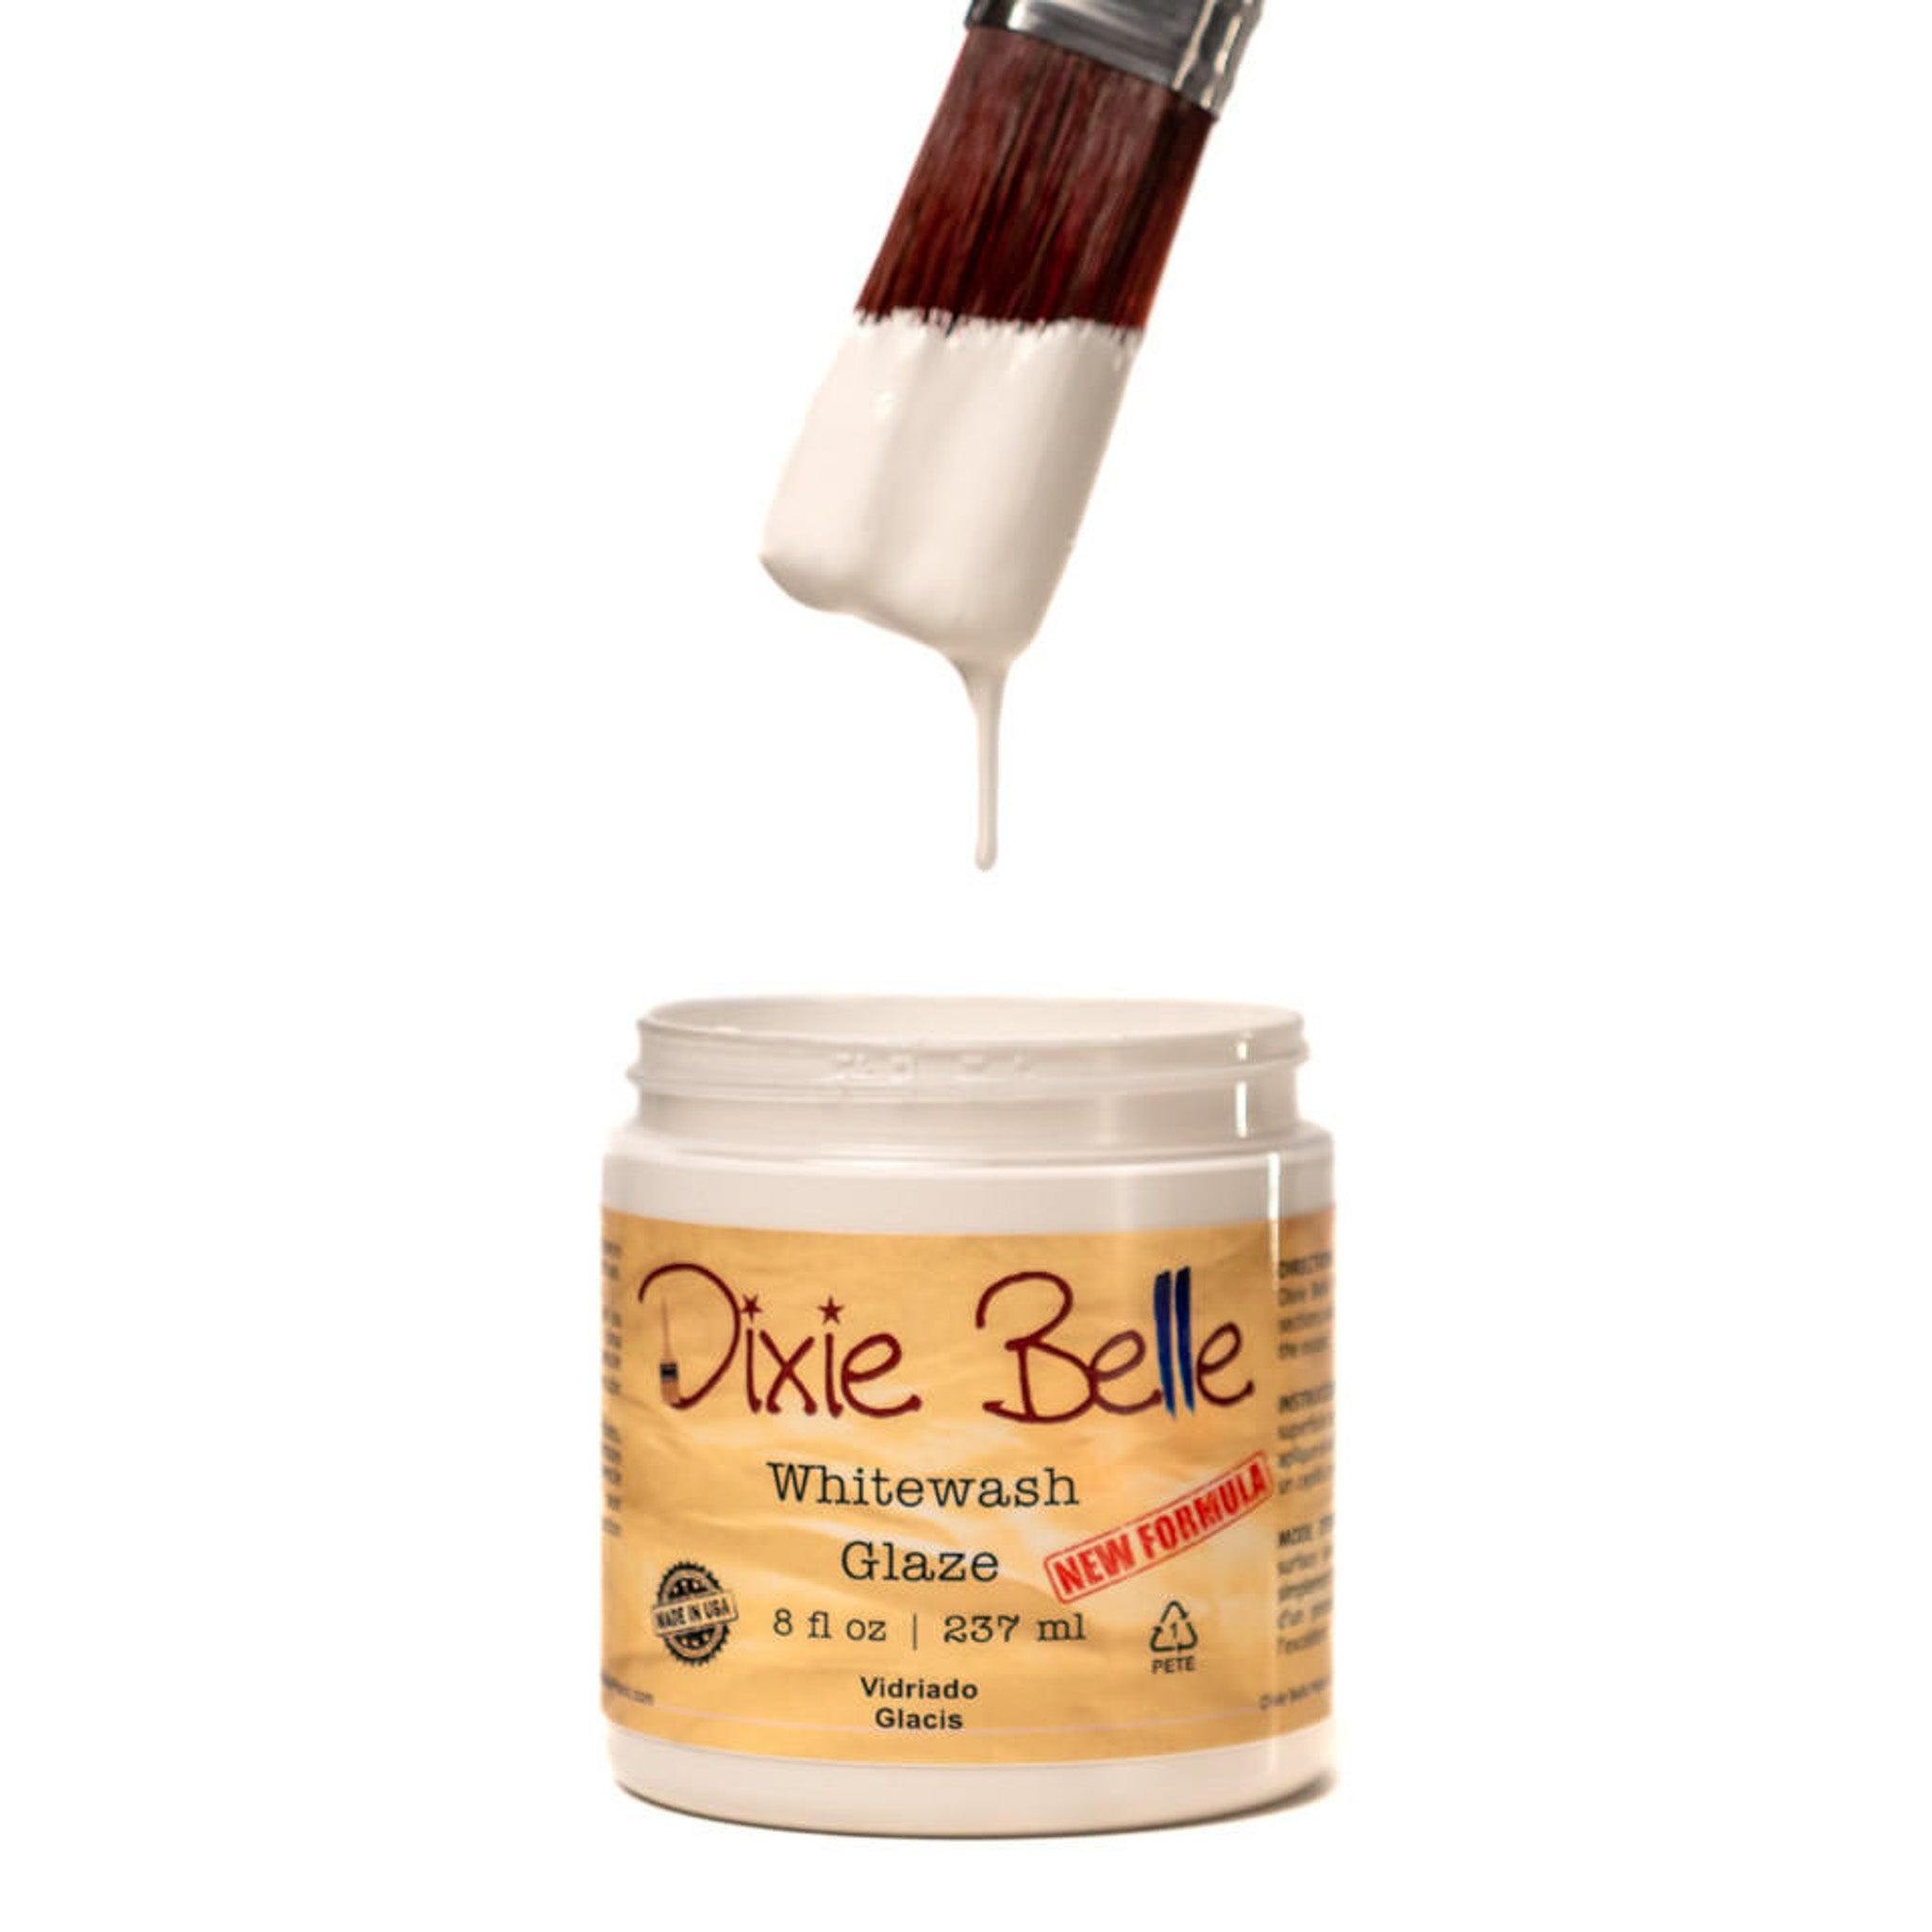 An open container of an 8oz/237ml Dixie Belle Whitewash Glaze with a dripping paintbrush above it is against a white background.